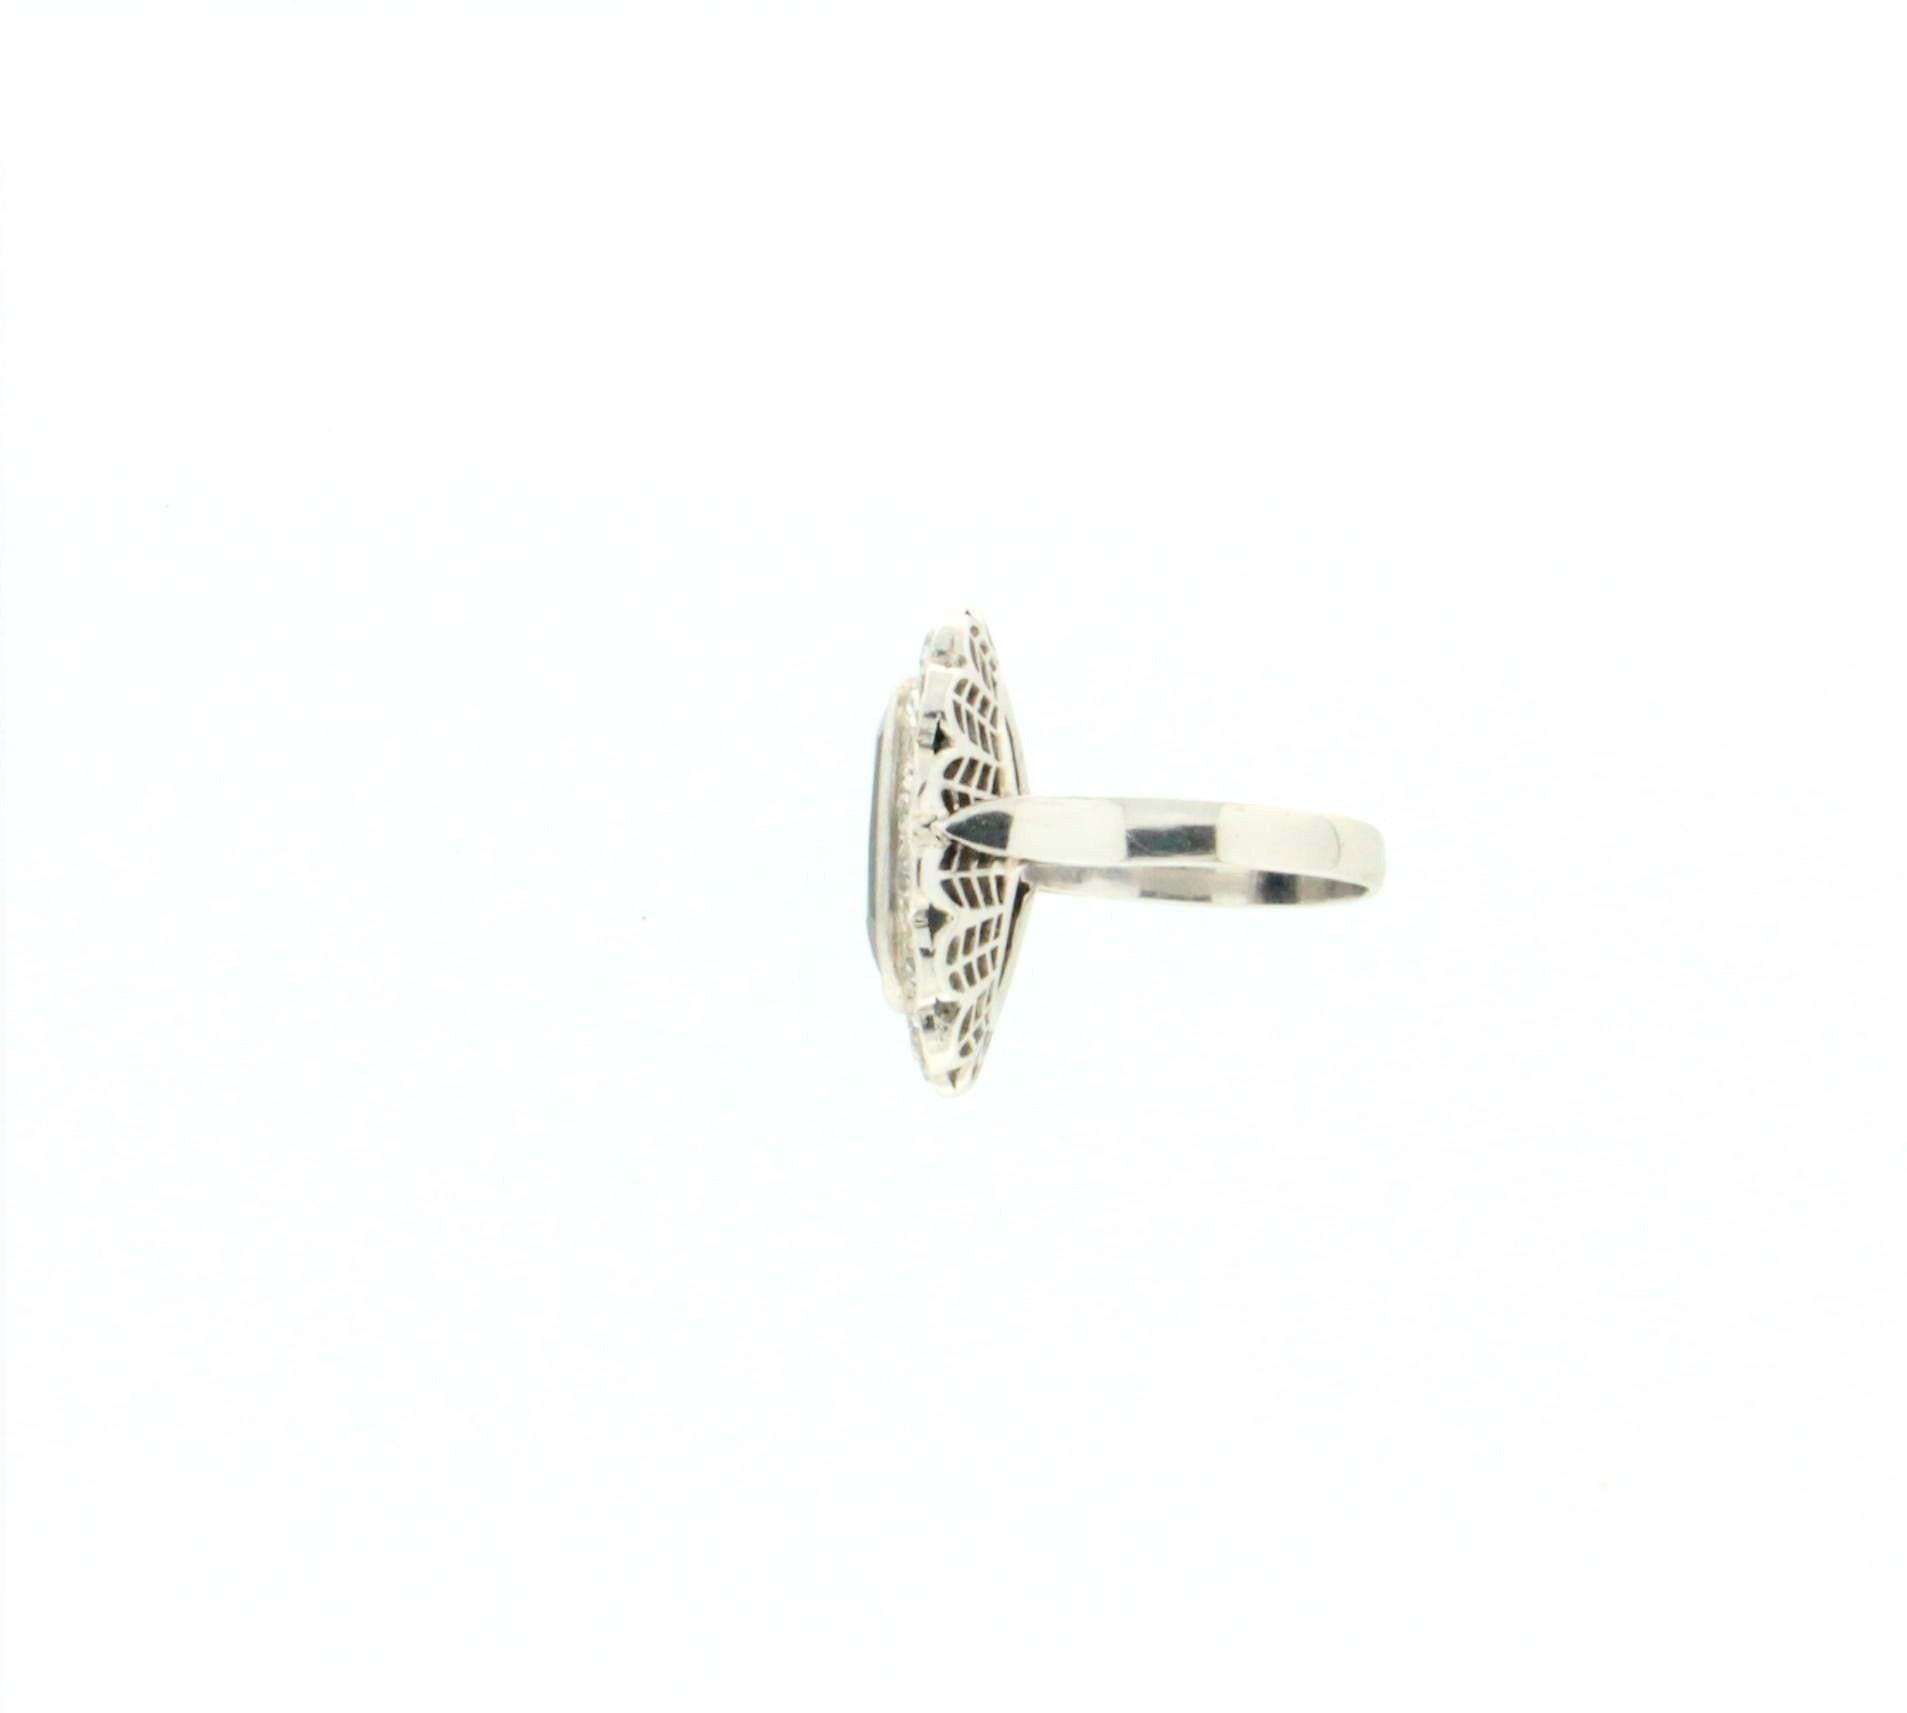 Handcraft Sapphire 18 Karat White Gold Diamonds Cocktail Ring In New Condition For Sale In Marcianise, IT